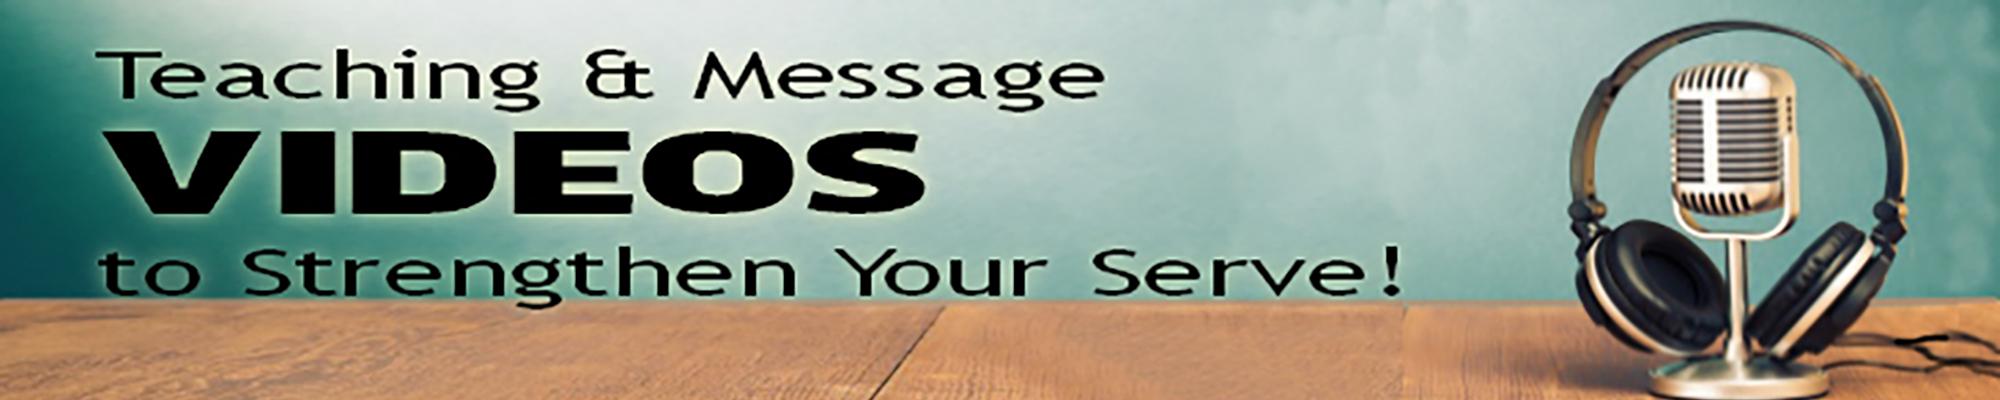 Teaching & Message Videos to Strengthen Your Serve!